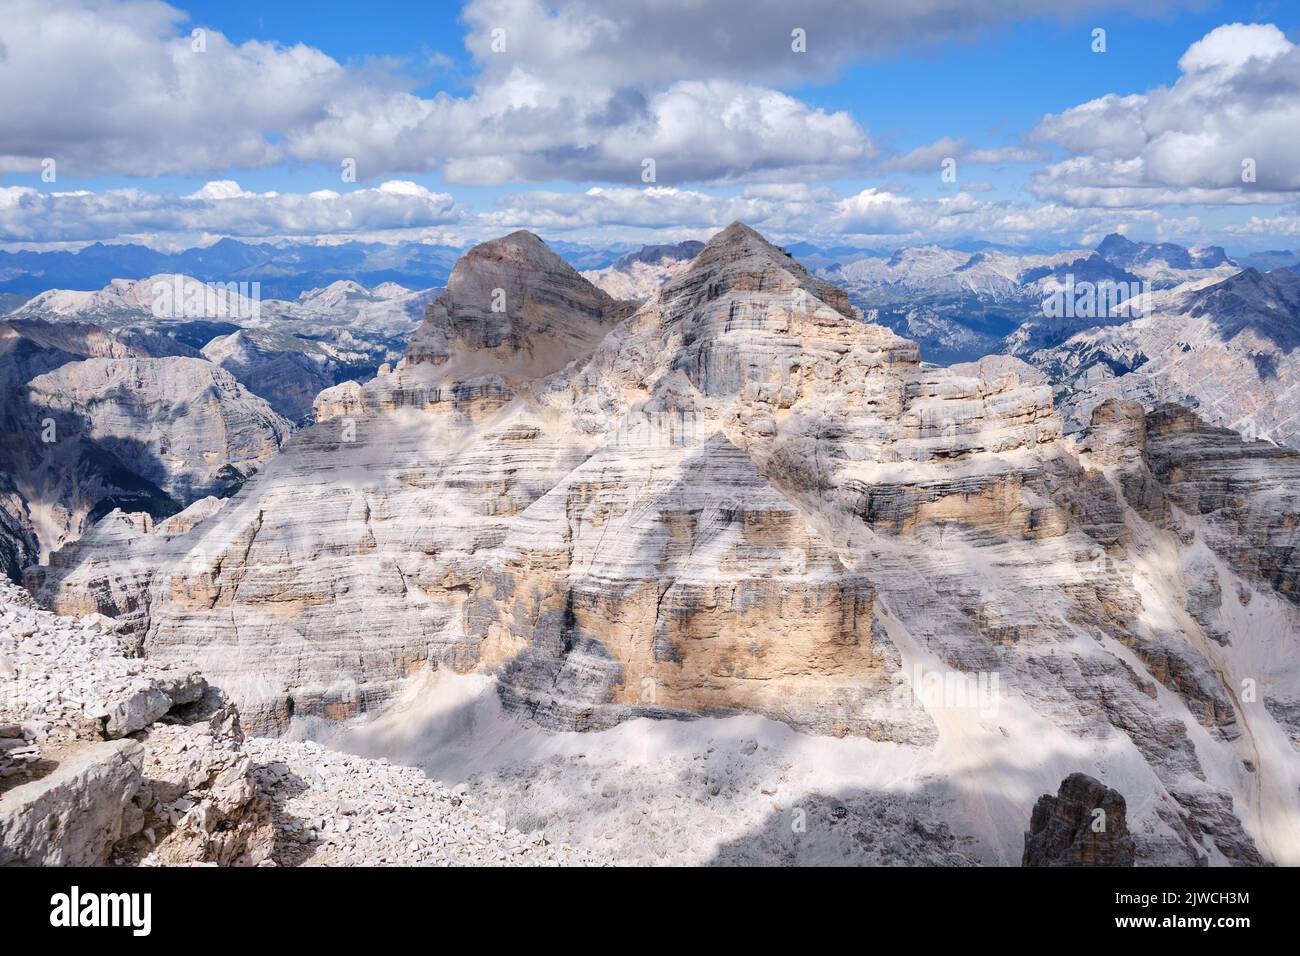 Tofana di Mezzo and di Dentro peaks in Dolomites mountains, Italy, with cloud shadows on a bright Summer day. Alps, summit, activity,hiking. Stock Photo